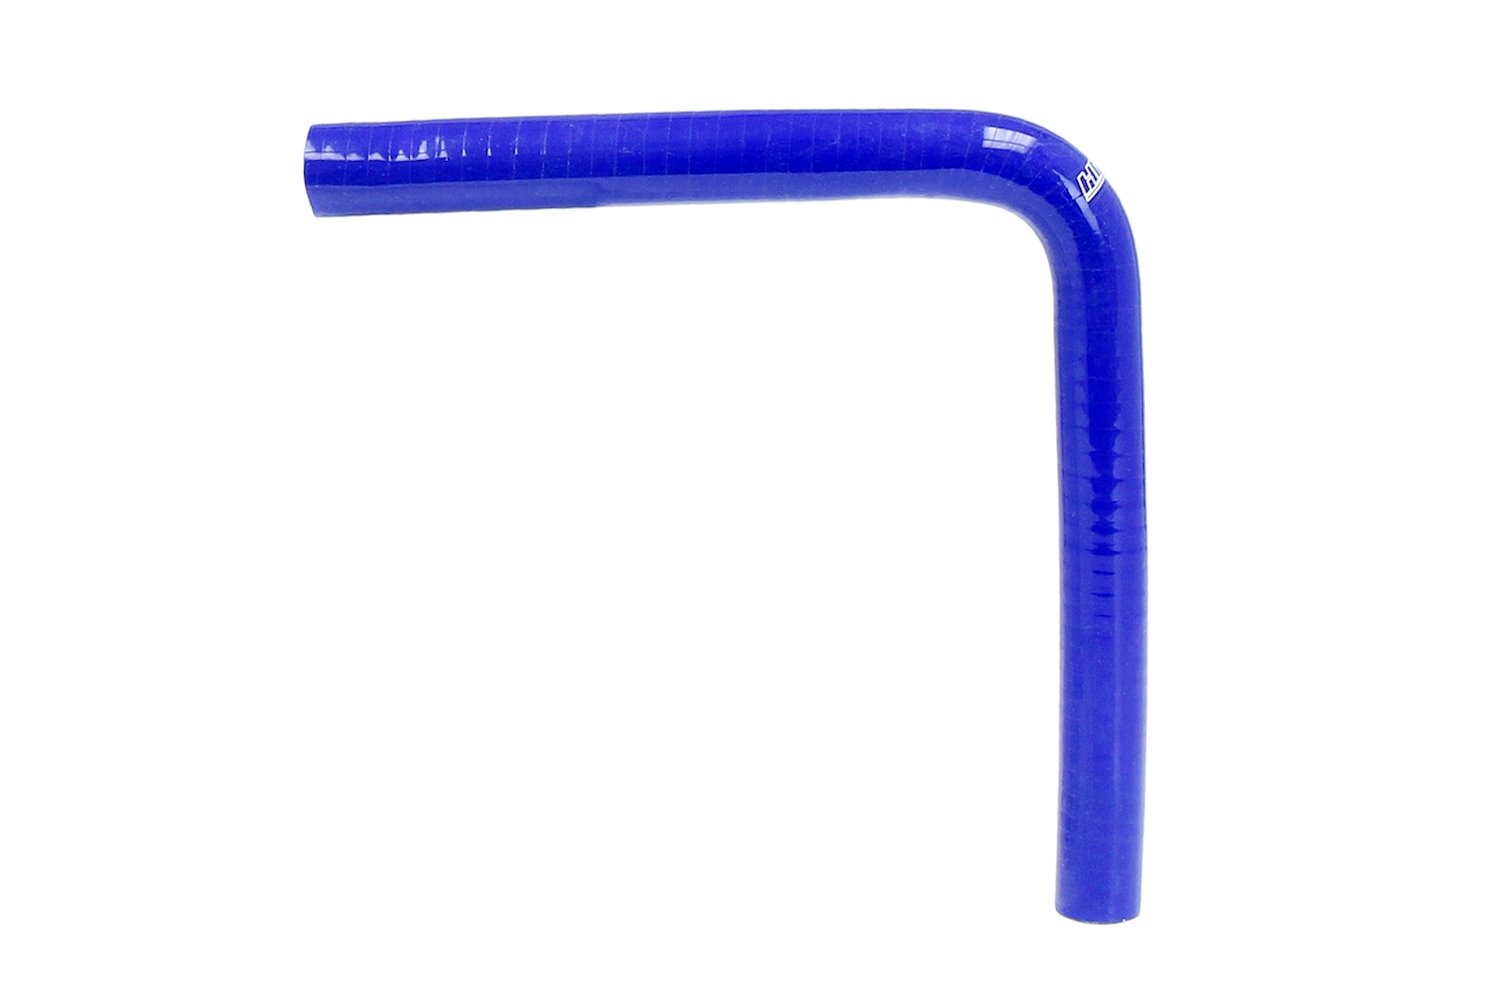 HTSEC90-087-L10-BLUE Silicone 90-Degree Elbow Hose, High-Temp 4-Ply Reinforced, 7/8 in. ID, 10 in. Leg, Blue